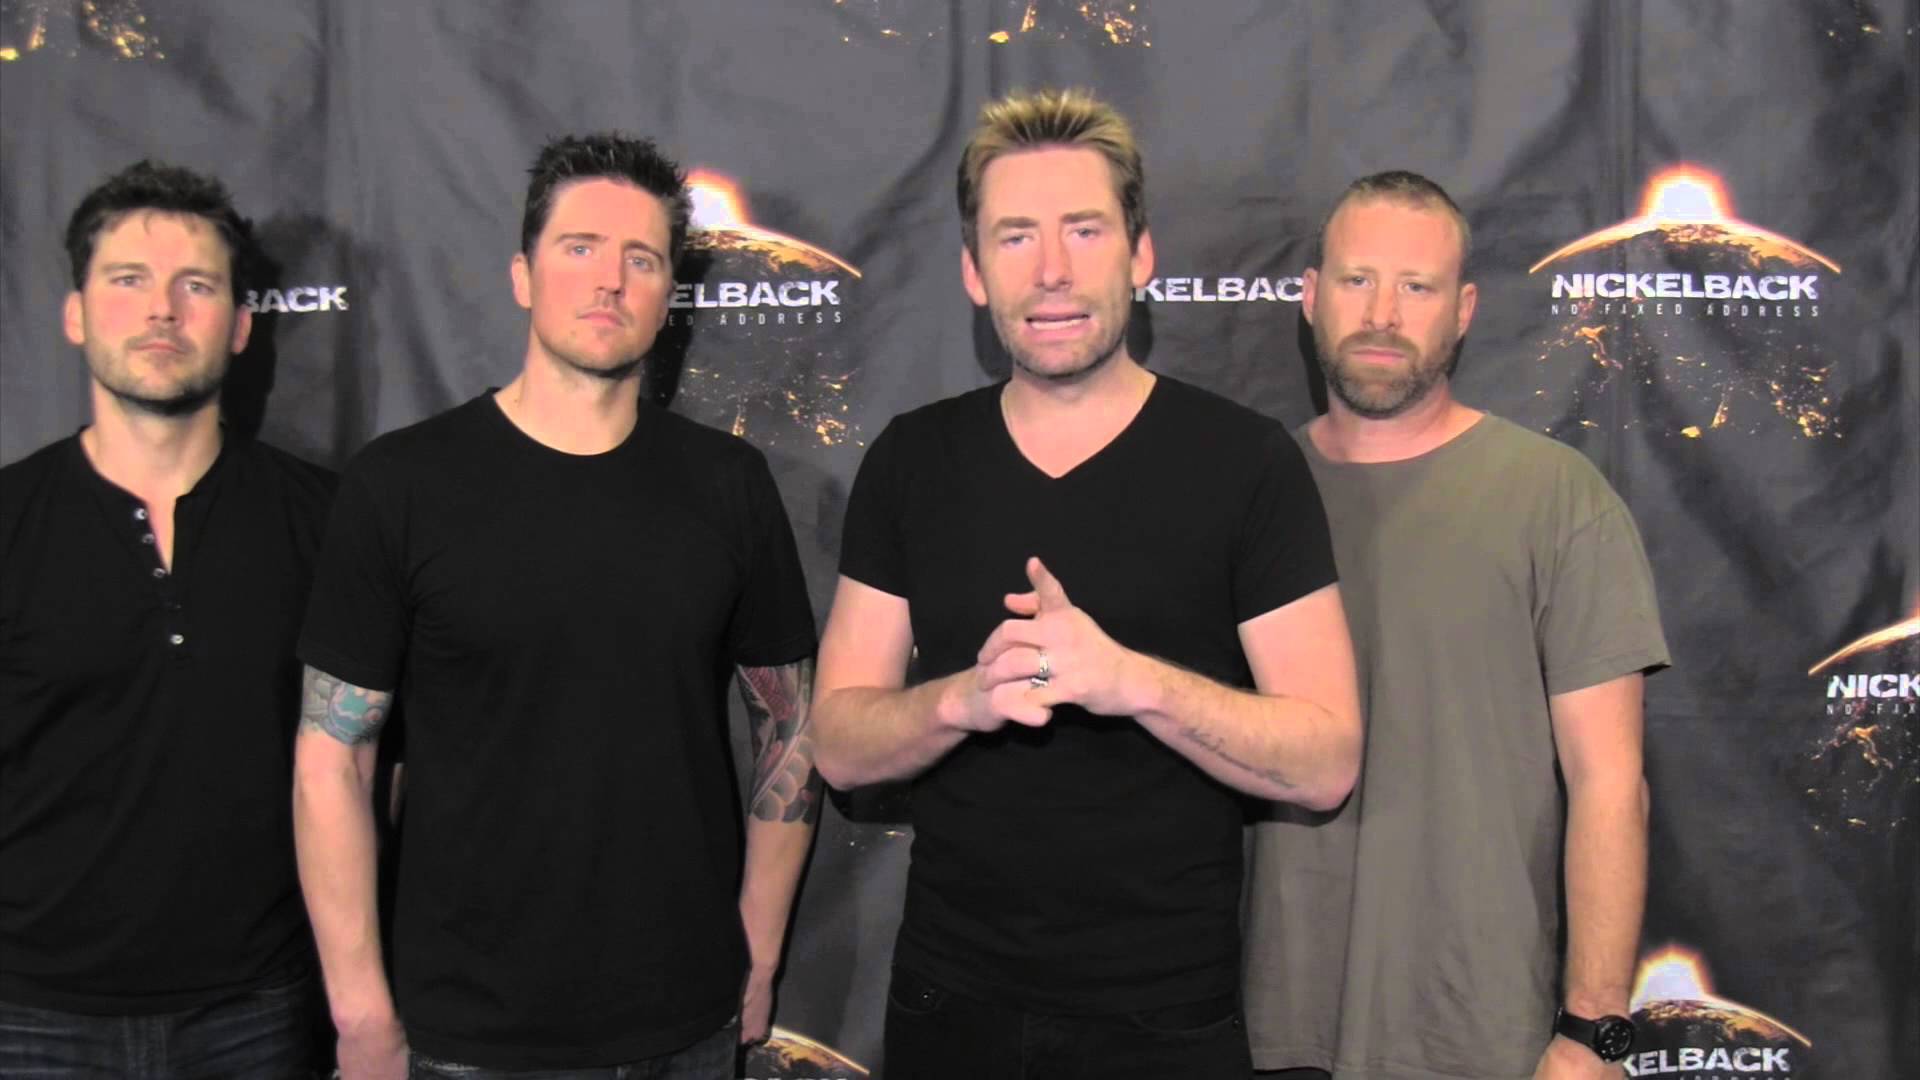 Nickelback Wallpaper Image Photos Pictures Background